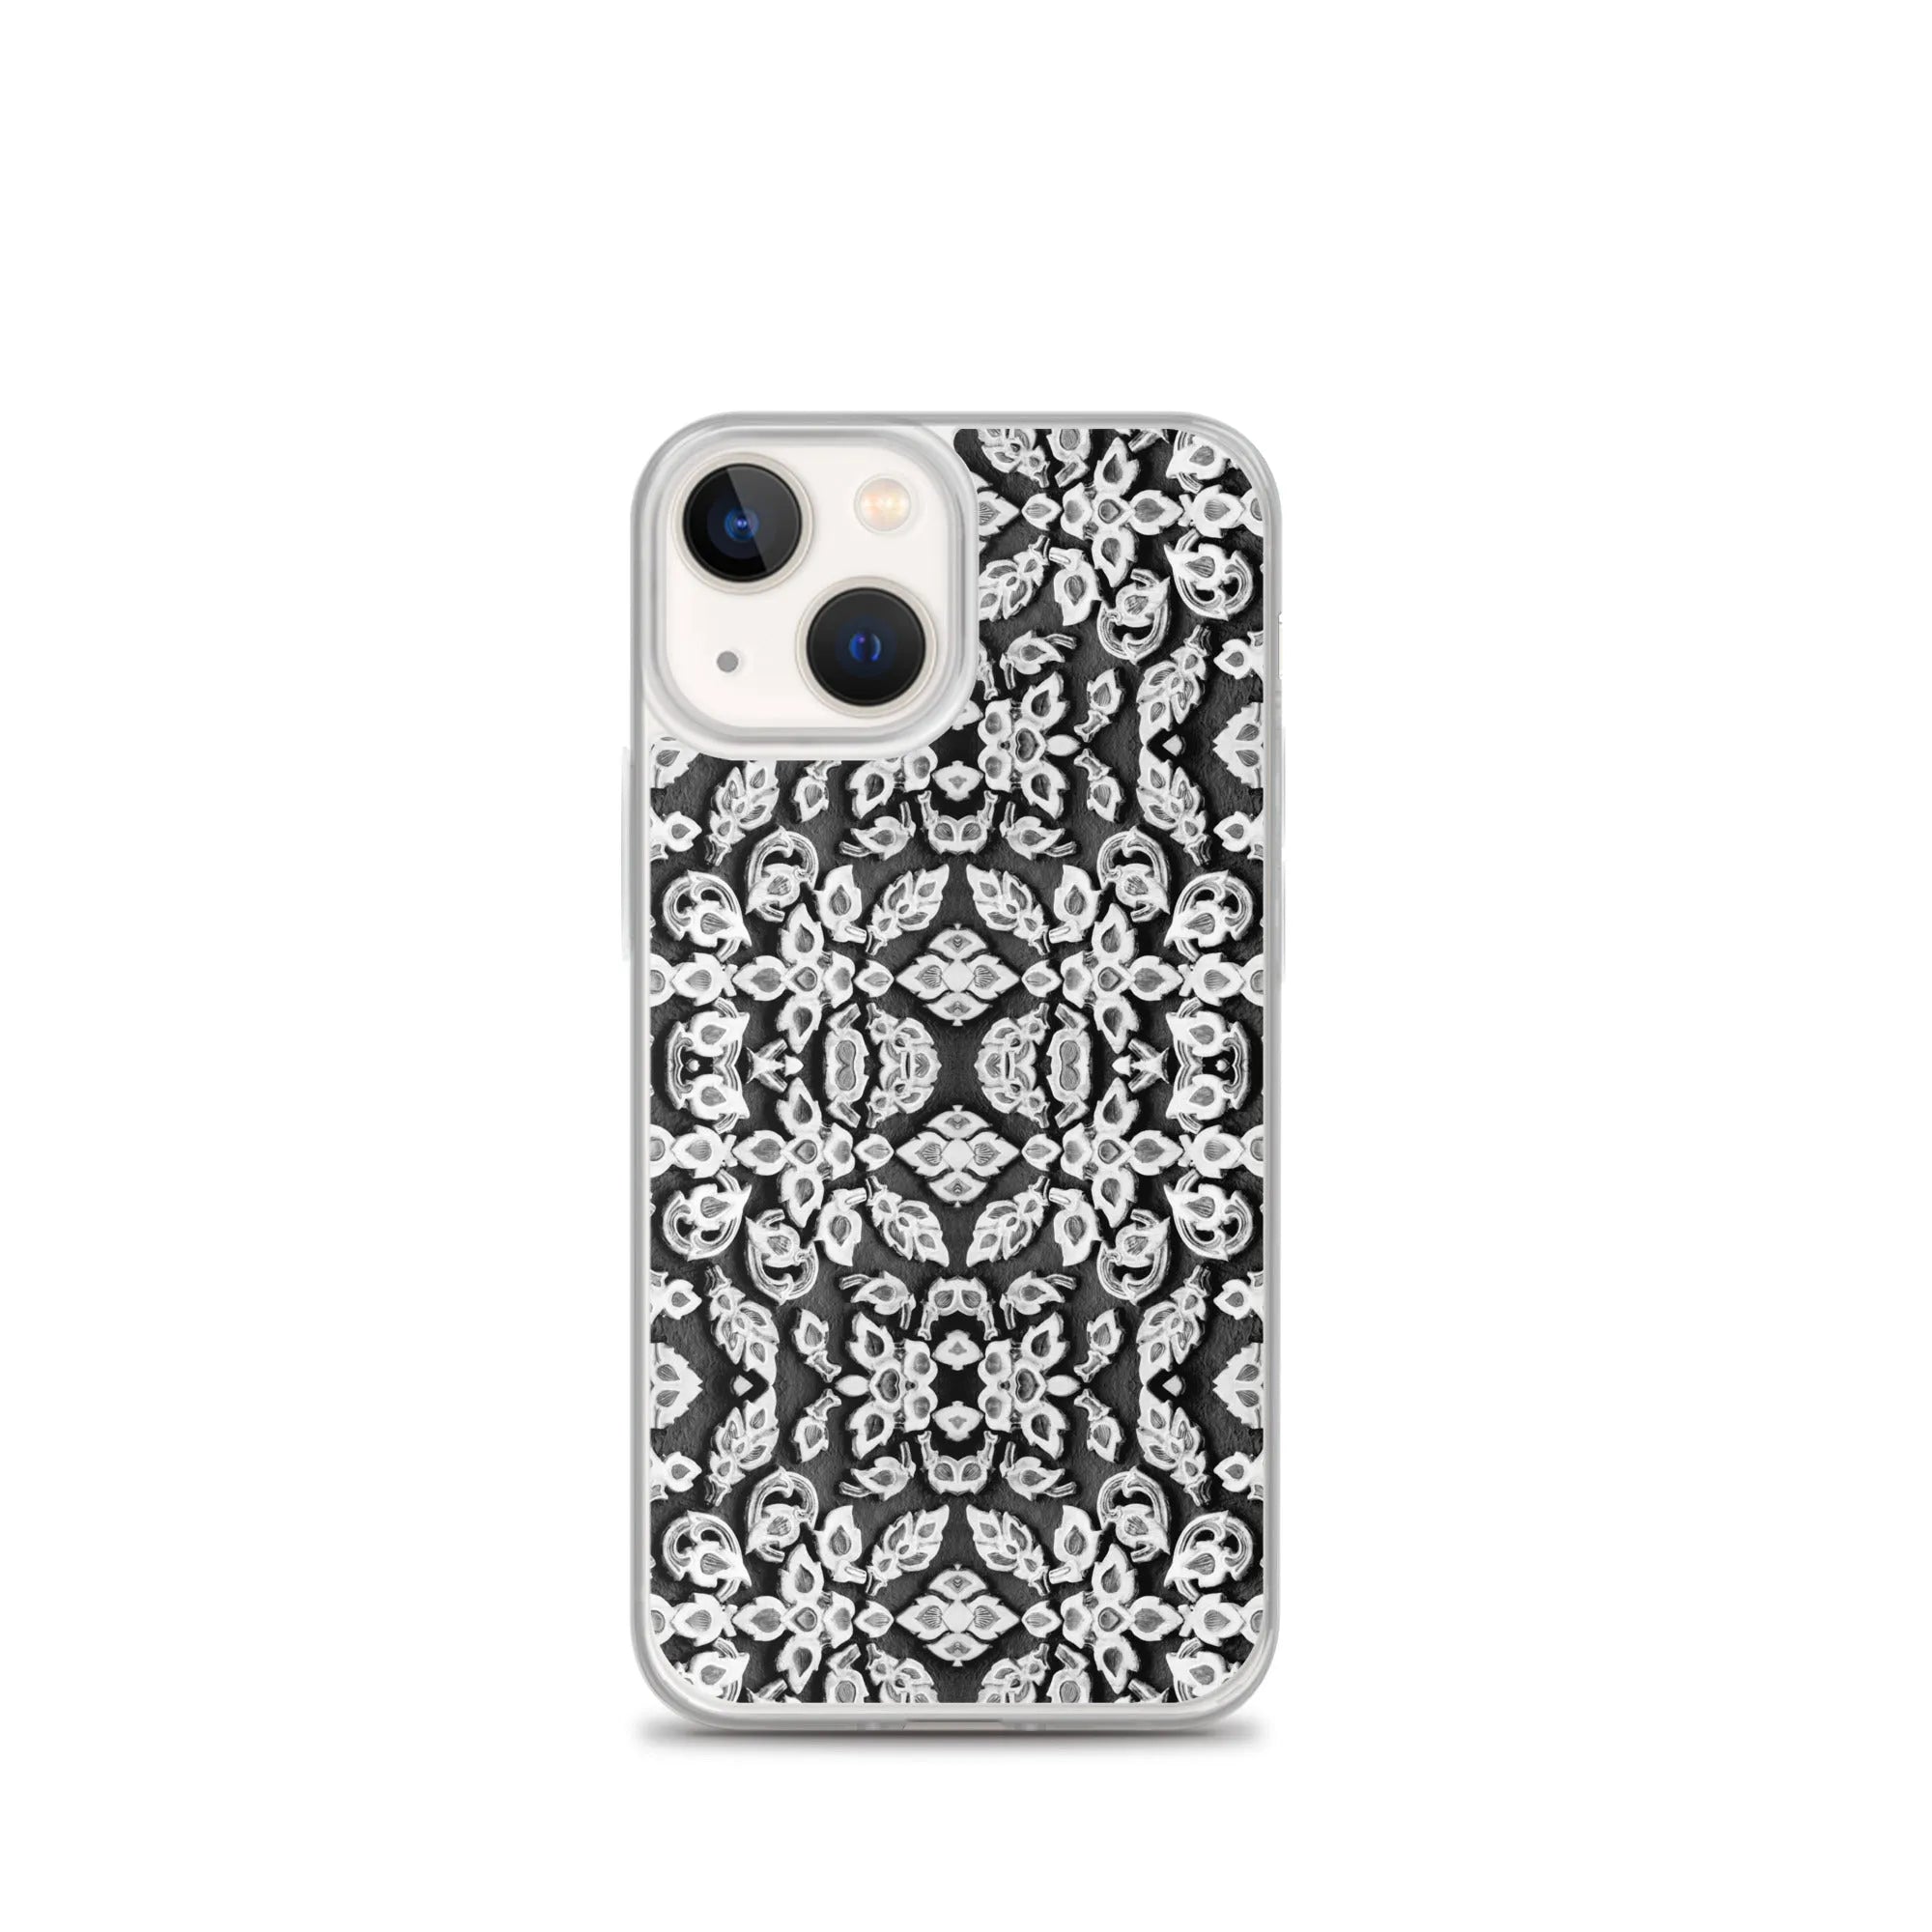 Entering Ayodhya Pattern Iphone Case - Black And White - Iphone 13 Mini - Mobile Phone Cases - Aesthetic Art